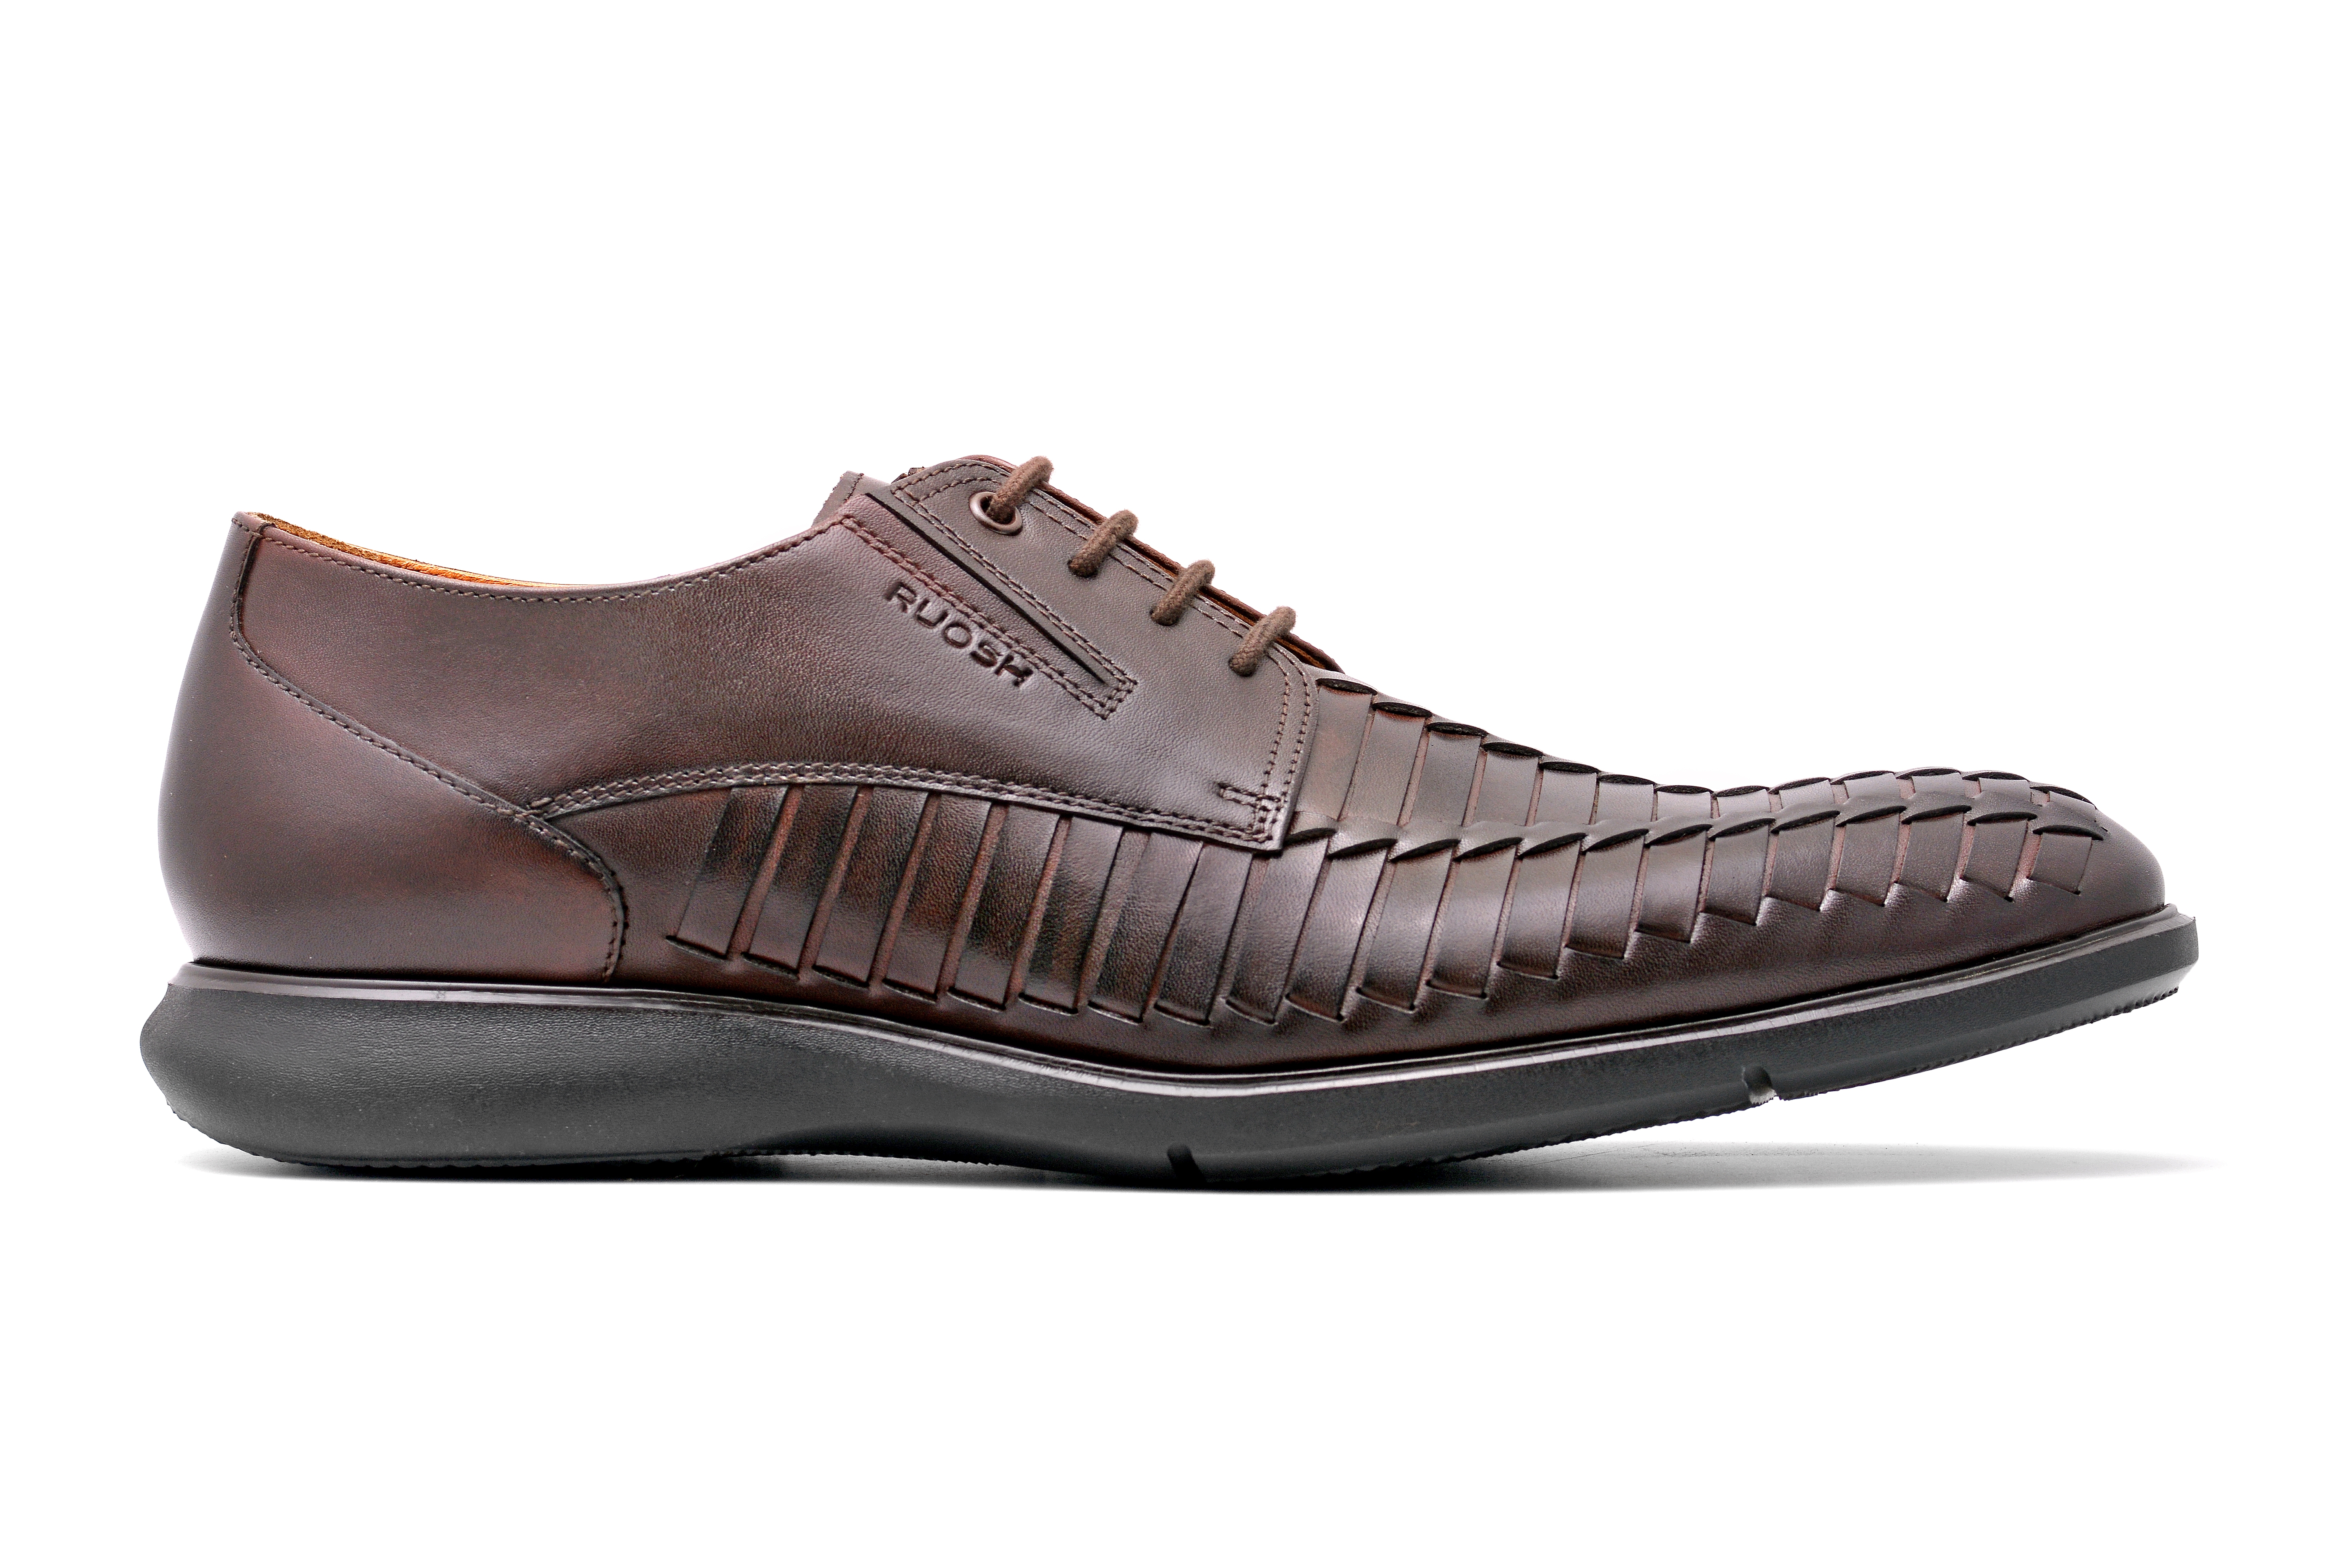 Brown Derby Shoes